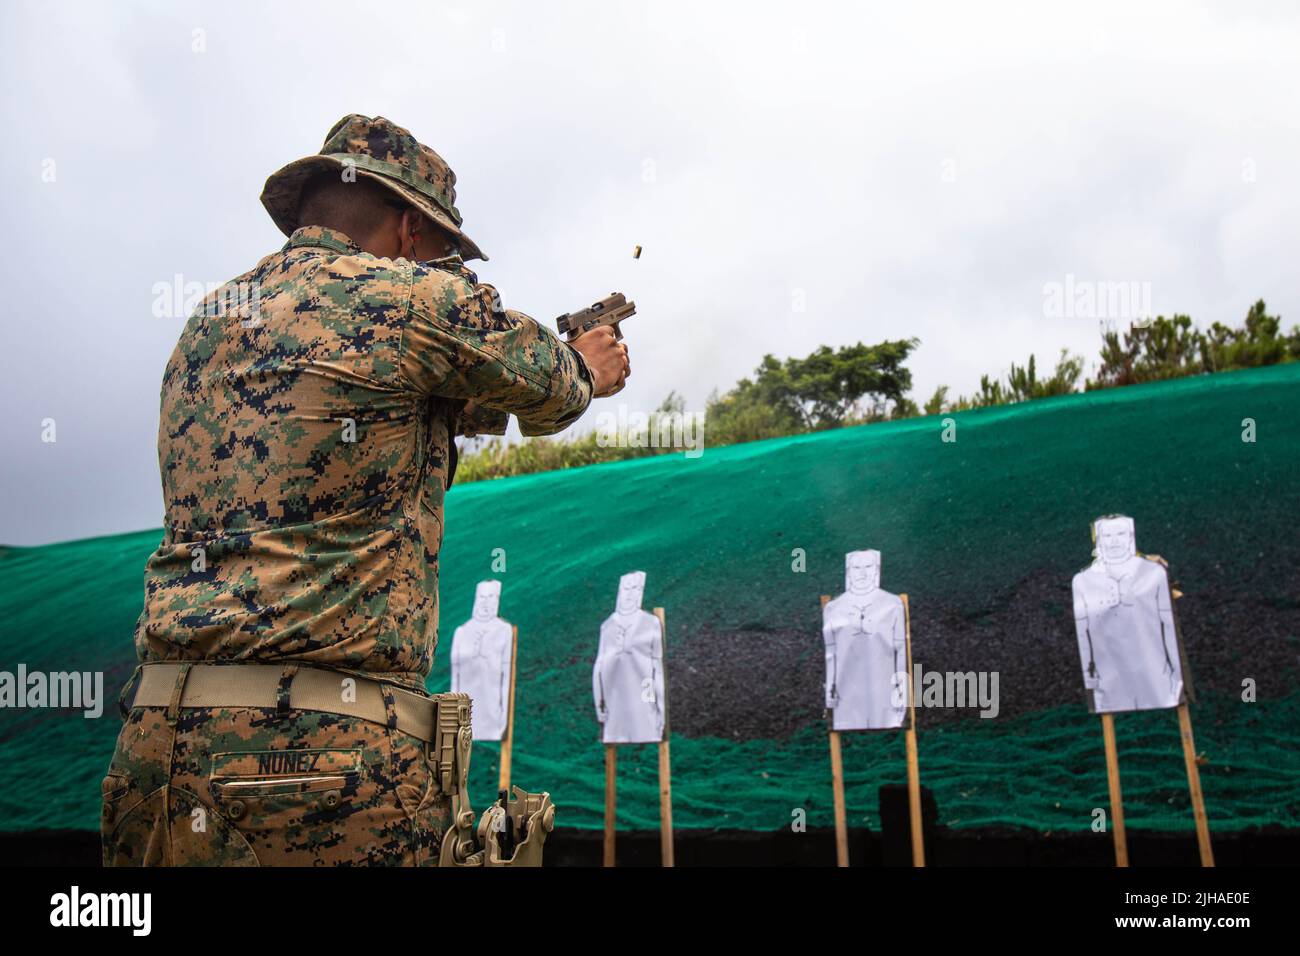 Camp Hansen, Okinawa, Japan. 7th July, 2022. U.S. Marine Corps Lance Cpl. Andrew Nunez, a mortarman with 3d Battalion, 3d Marines, fires an M18 Modular Handgun System during a Combat Marksmanship Program range at Camp Hansen, Okinawa, Japan, July 7, 2022. This training sharpened Marines' critical combat arms skills by executing transition drills and increasing their proficiency in switching between primary and secondary weapons. 3/3 is forward deployed in the Indo-Pacific under 4th Marines, 3d Marine Division as part of the Unit Deployment Program. Nunez is a native of Los Angles, California Stock Photo